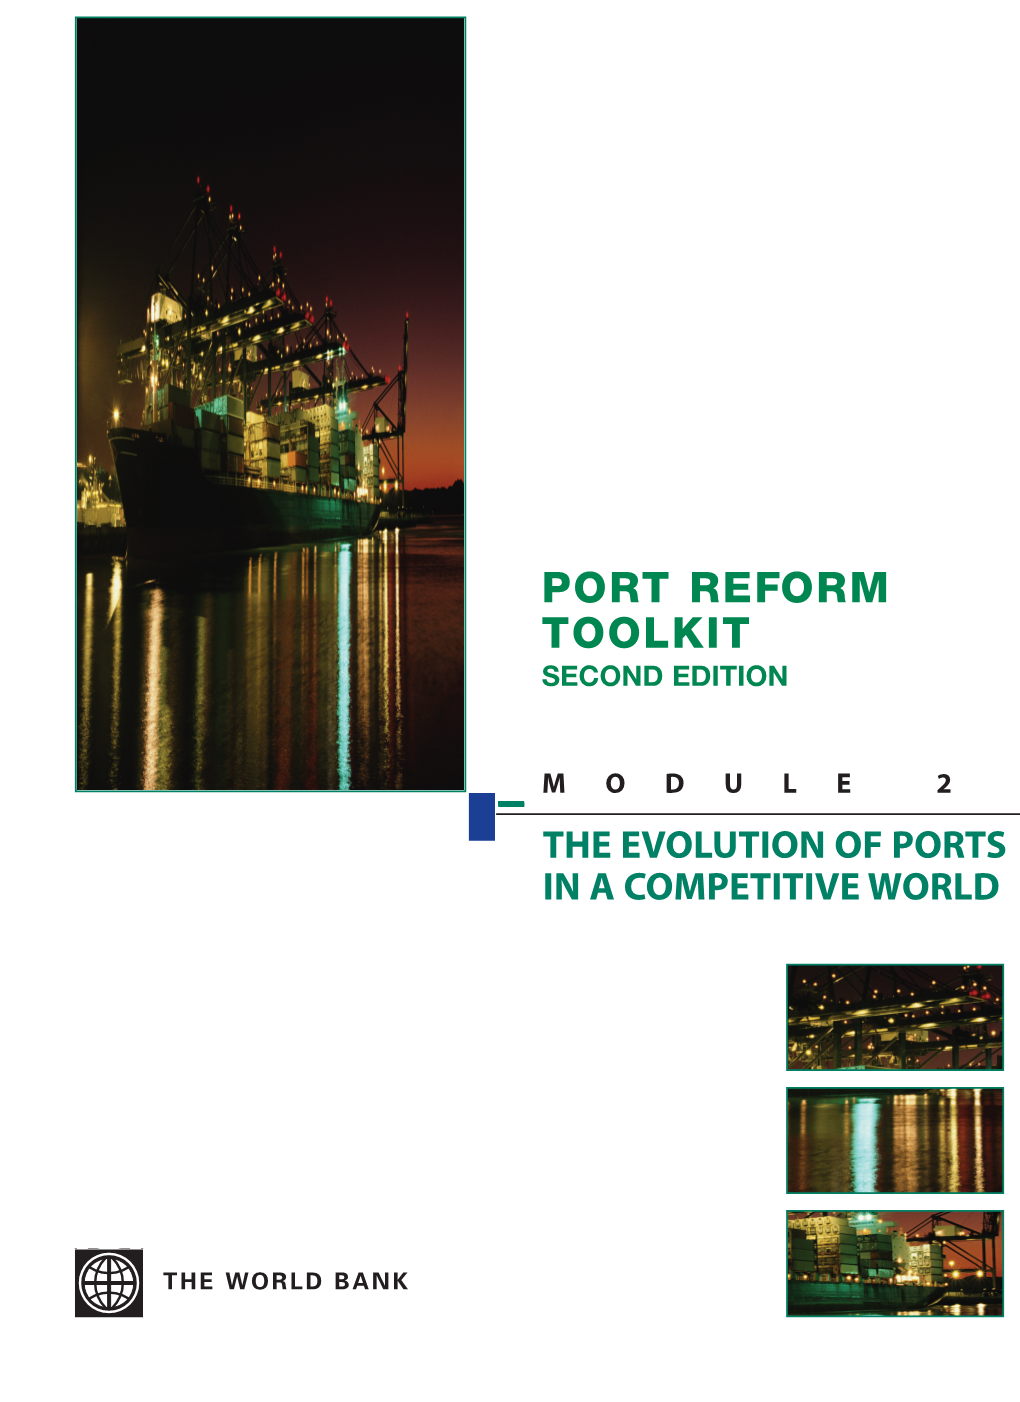 Module 2: the Evolution of Ports in a Competitive World